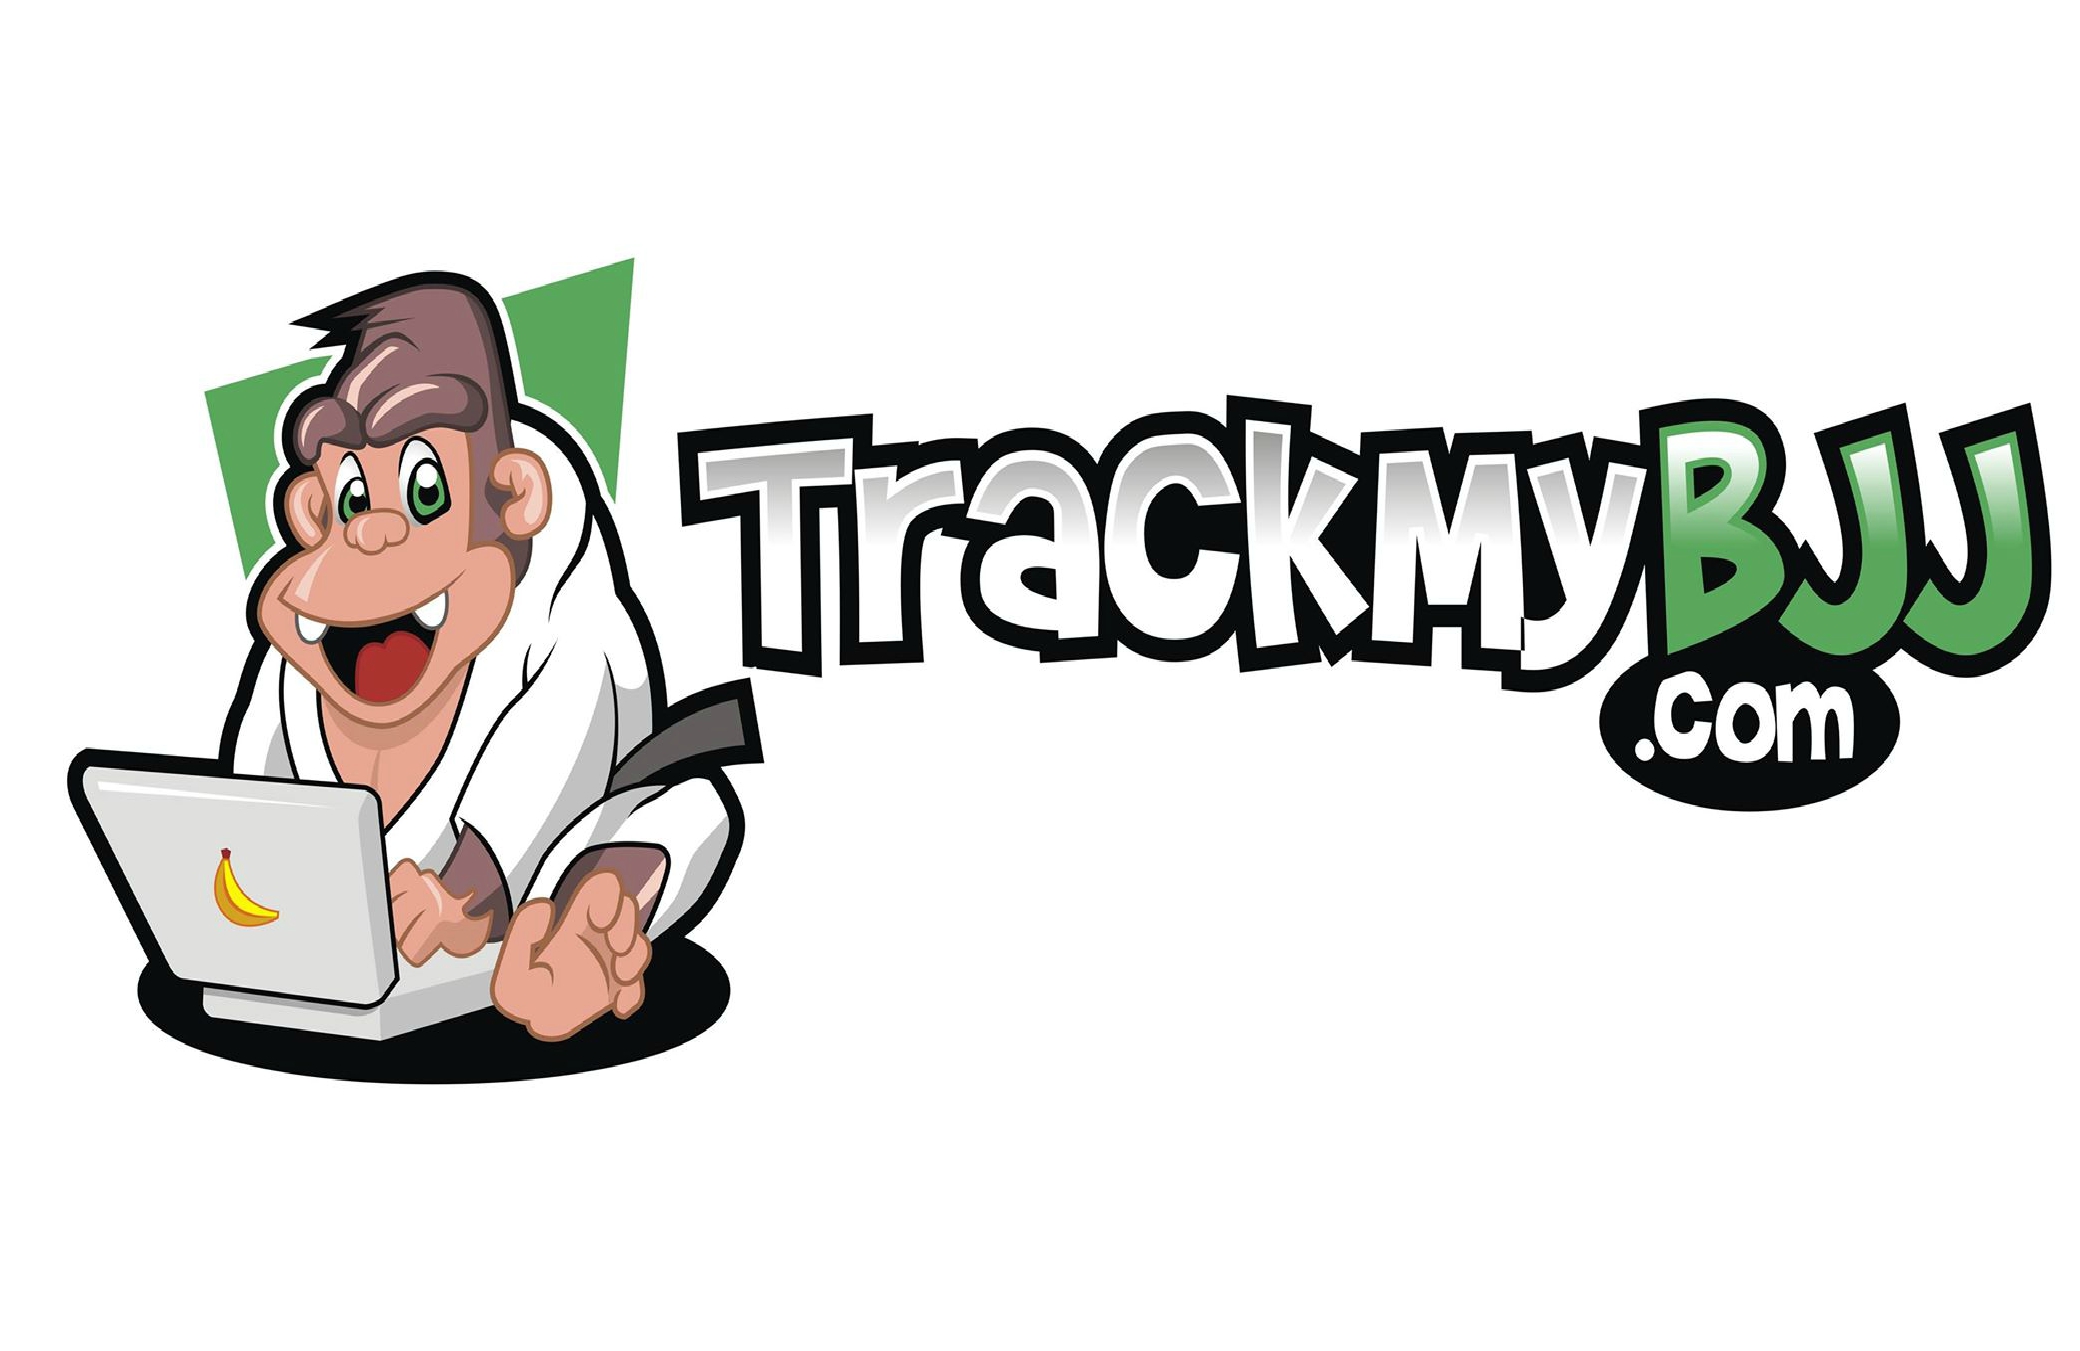 Great Resource: TrackmyBJJ.com now Available 100% FREE